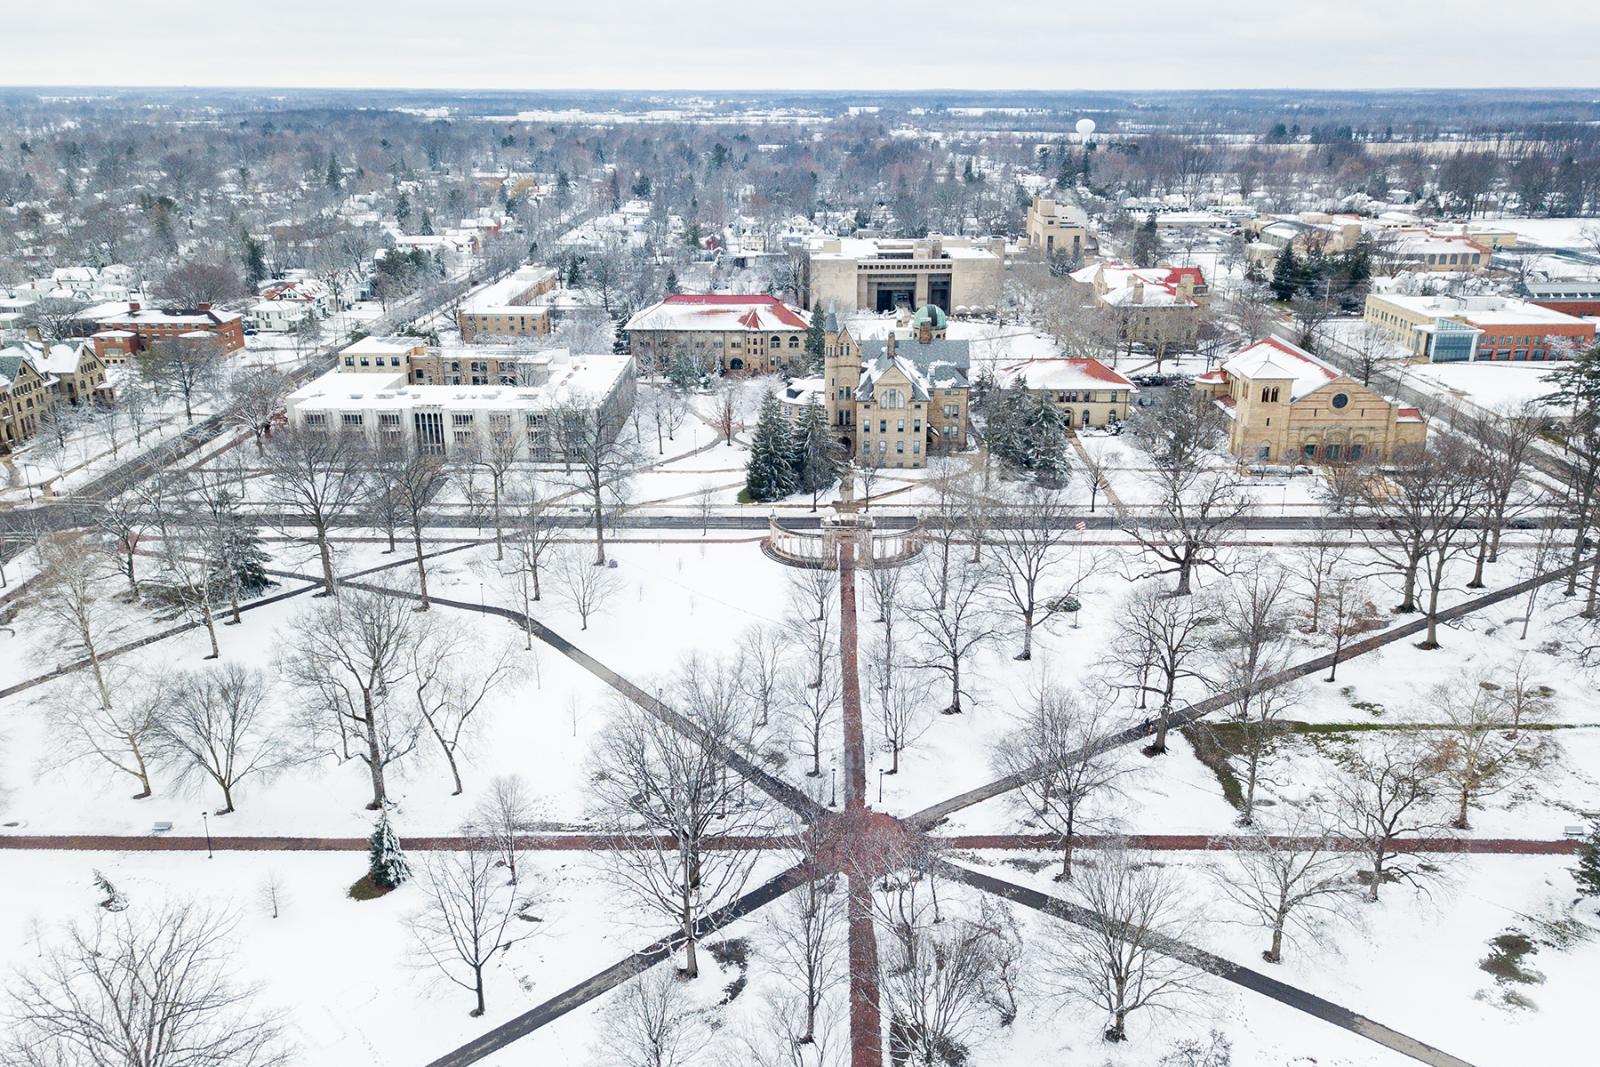 Aerial view of snowy campus during winter.